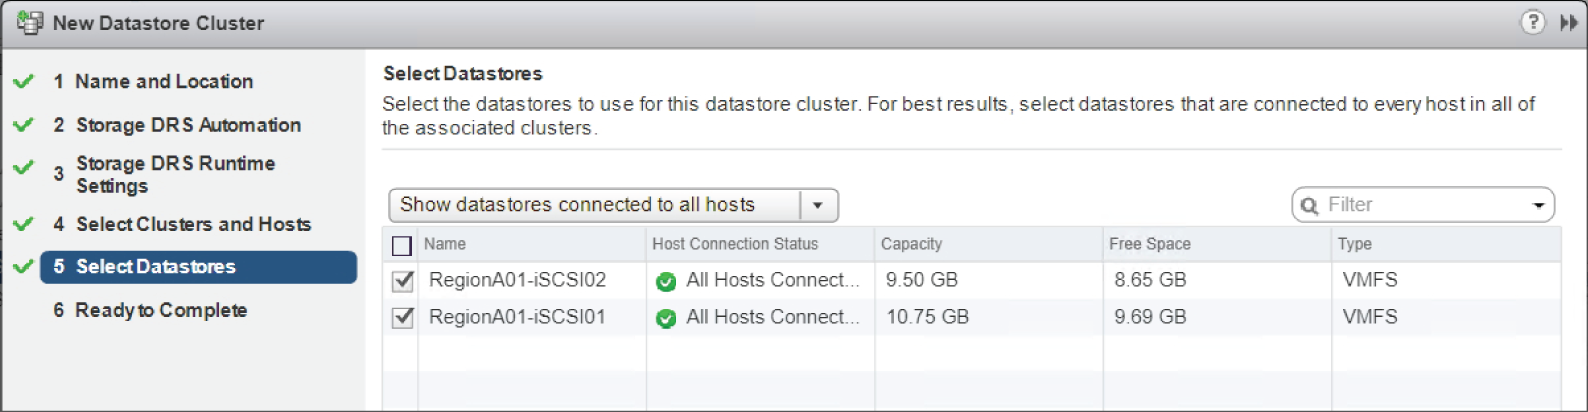 Snapshot of picking two identical datastores to add to the cluster.